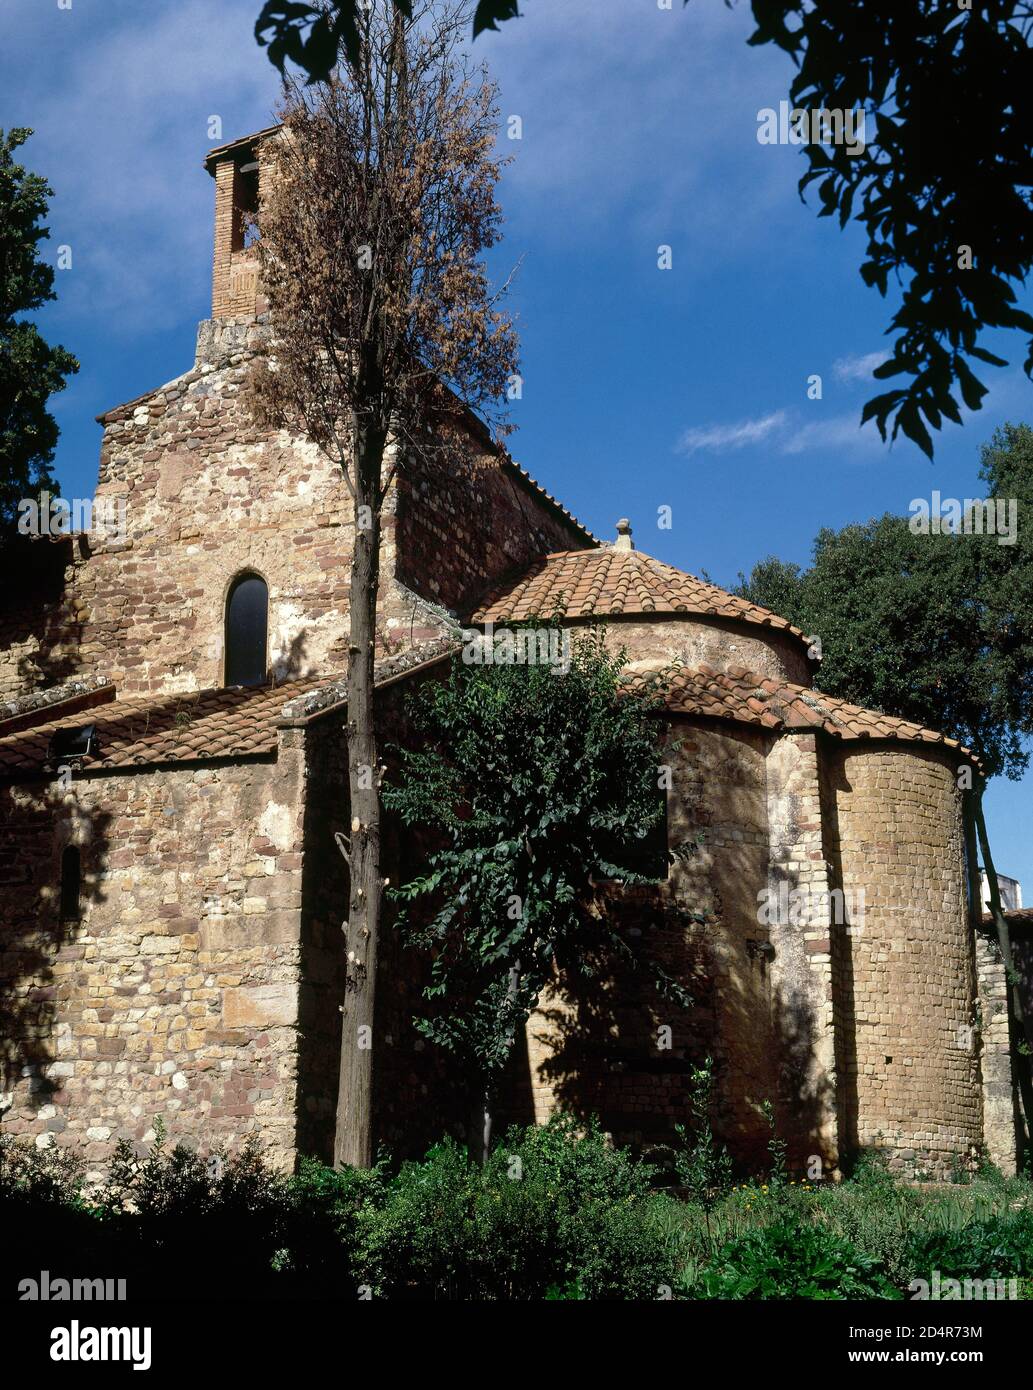 Monumental chuch complex of St. Pere. Terrassa, province of Barcelona, Catalonia, Spain. Church of Sant Pere. It dates from the late medieval and Romanesque period (12th century). Stock Photo